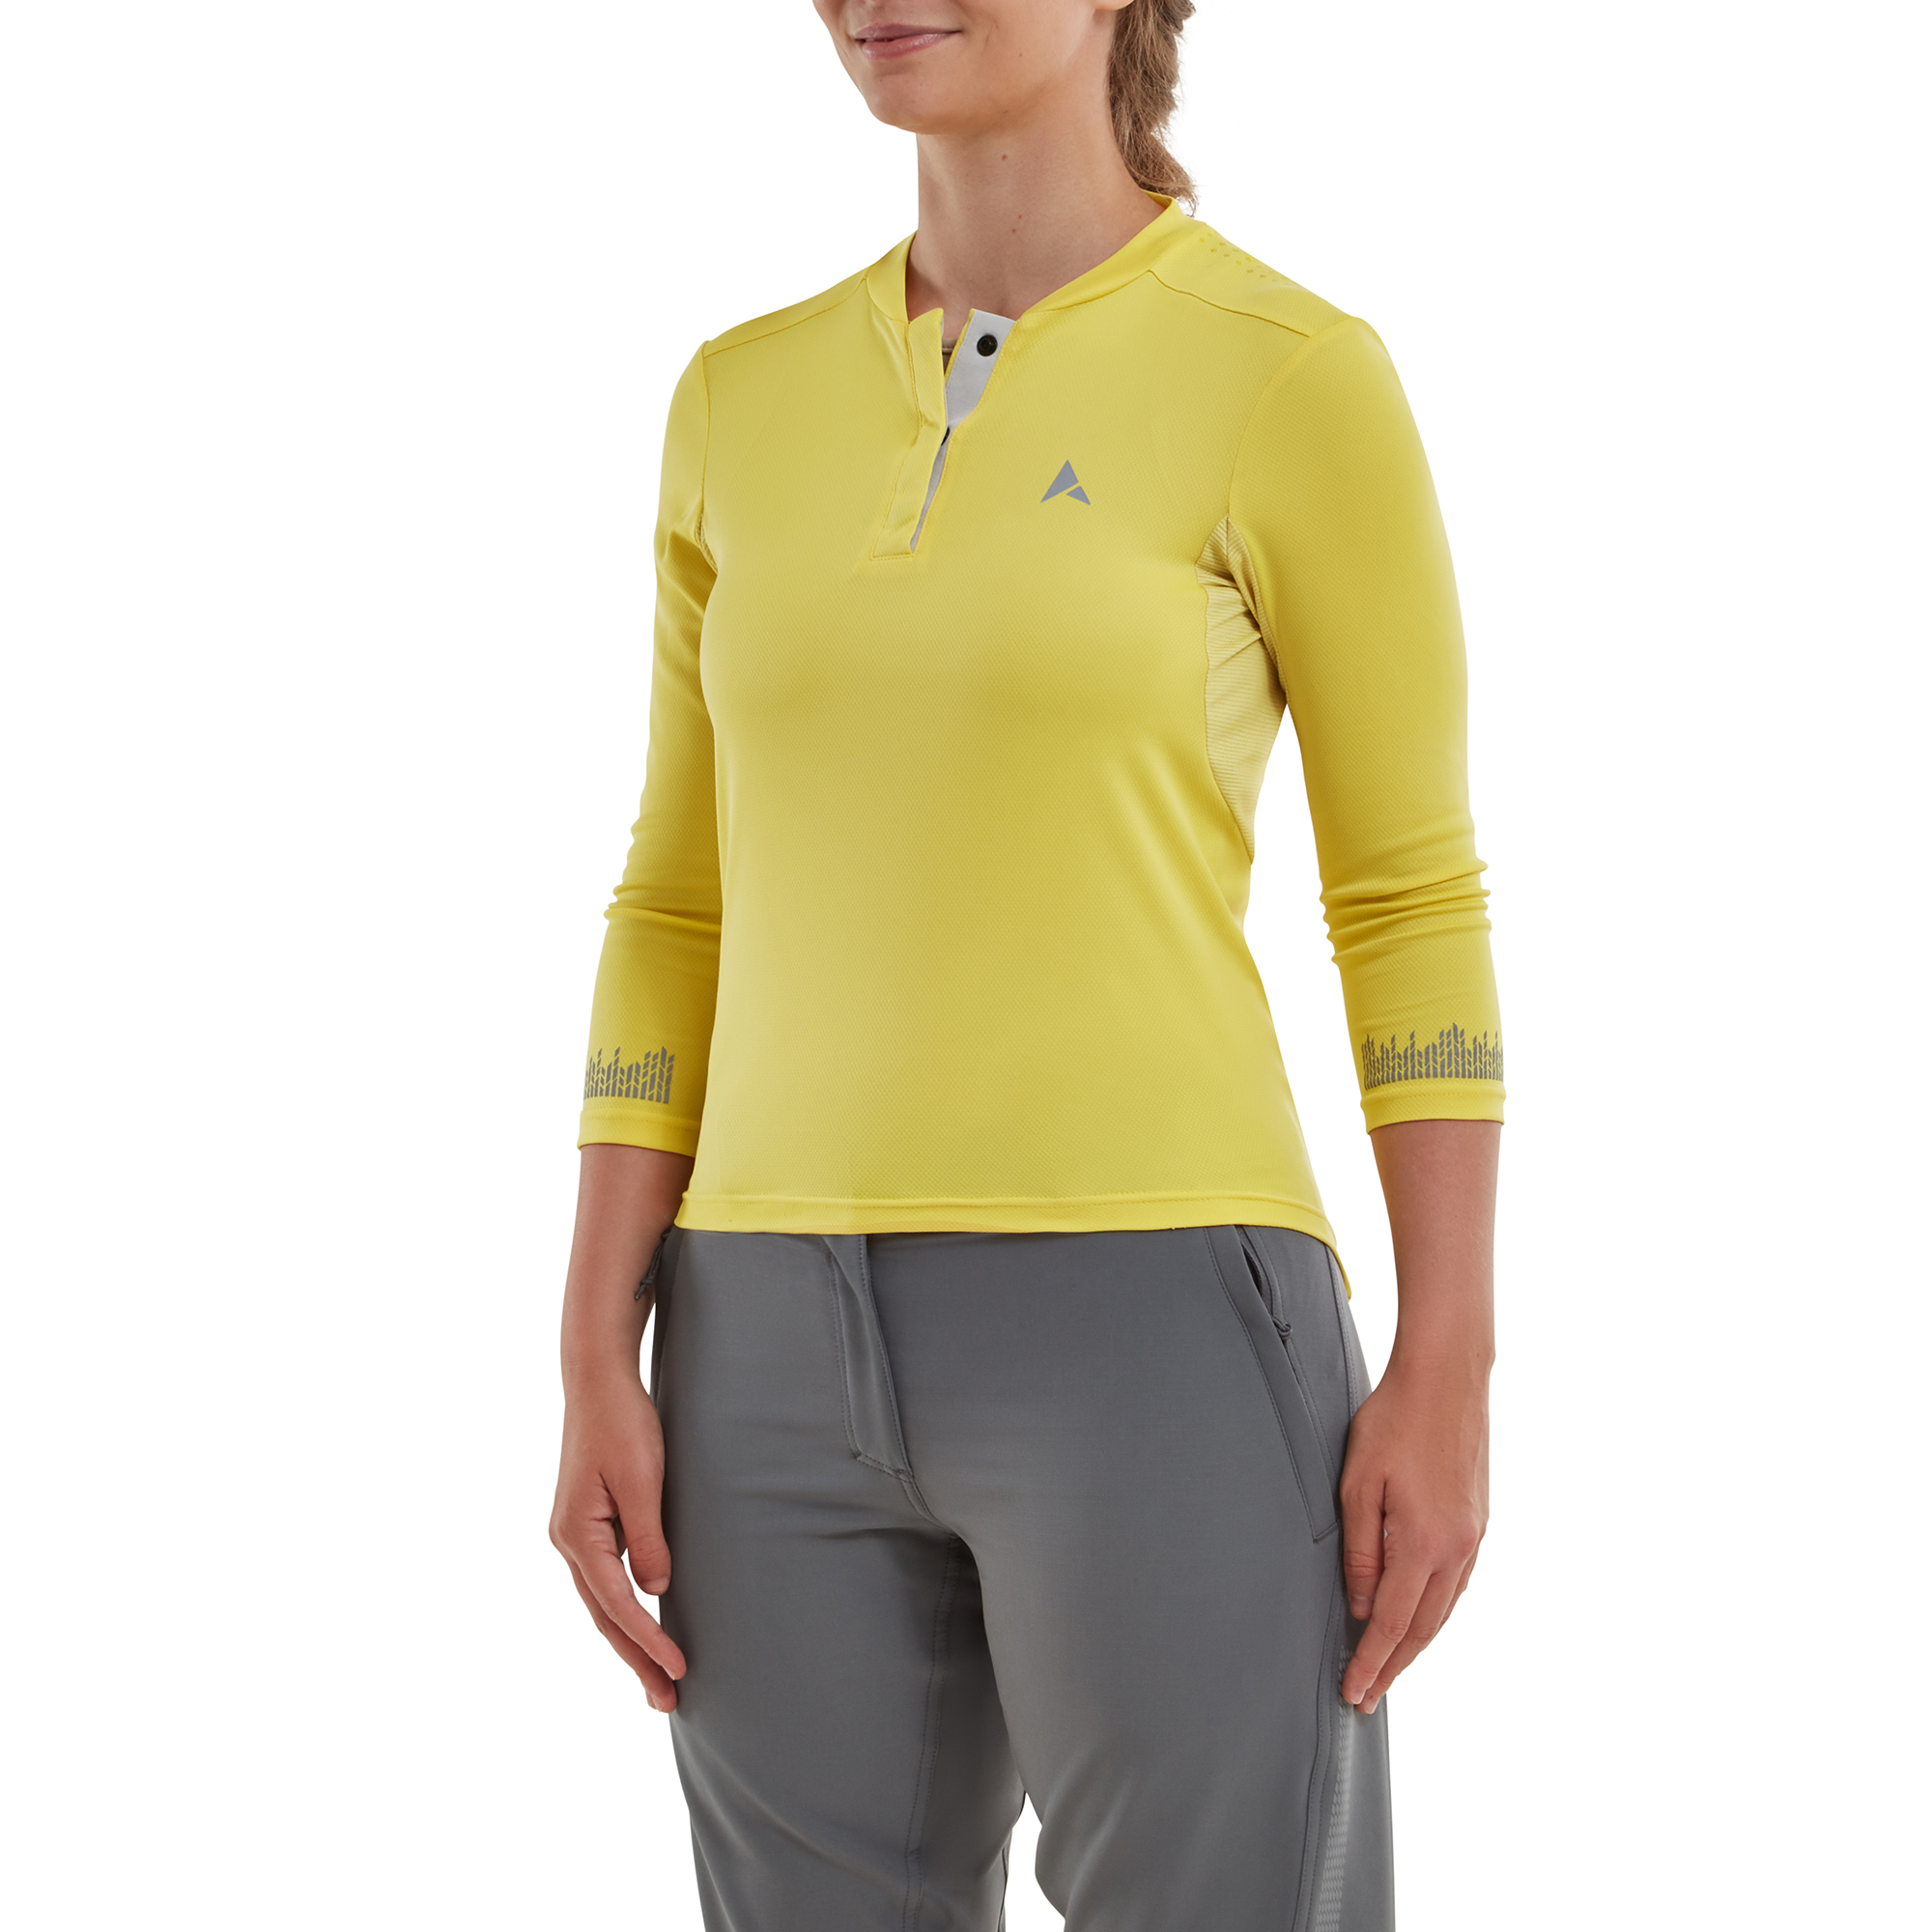 Altura  Women’s 3/4 Sleeve All Road Jersey 10 YELLOW